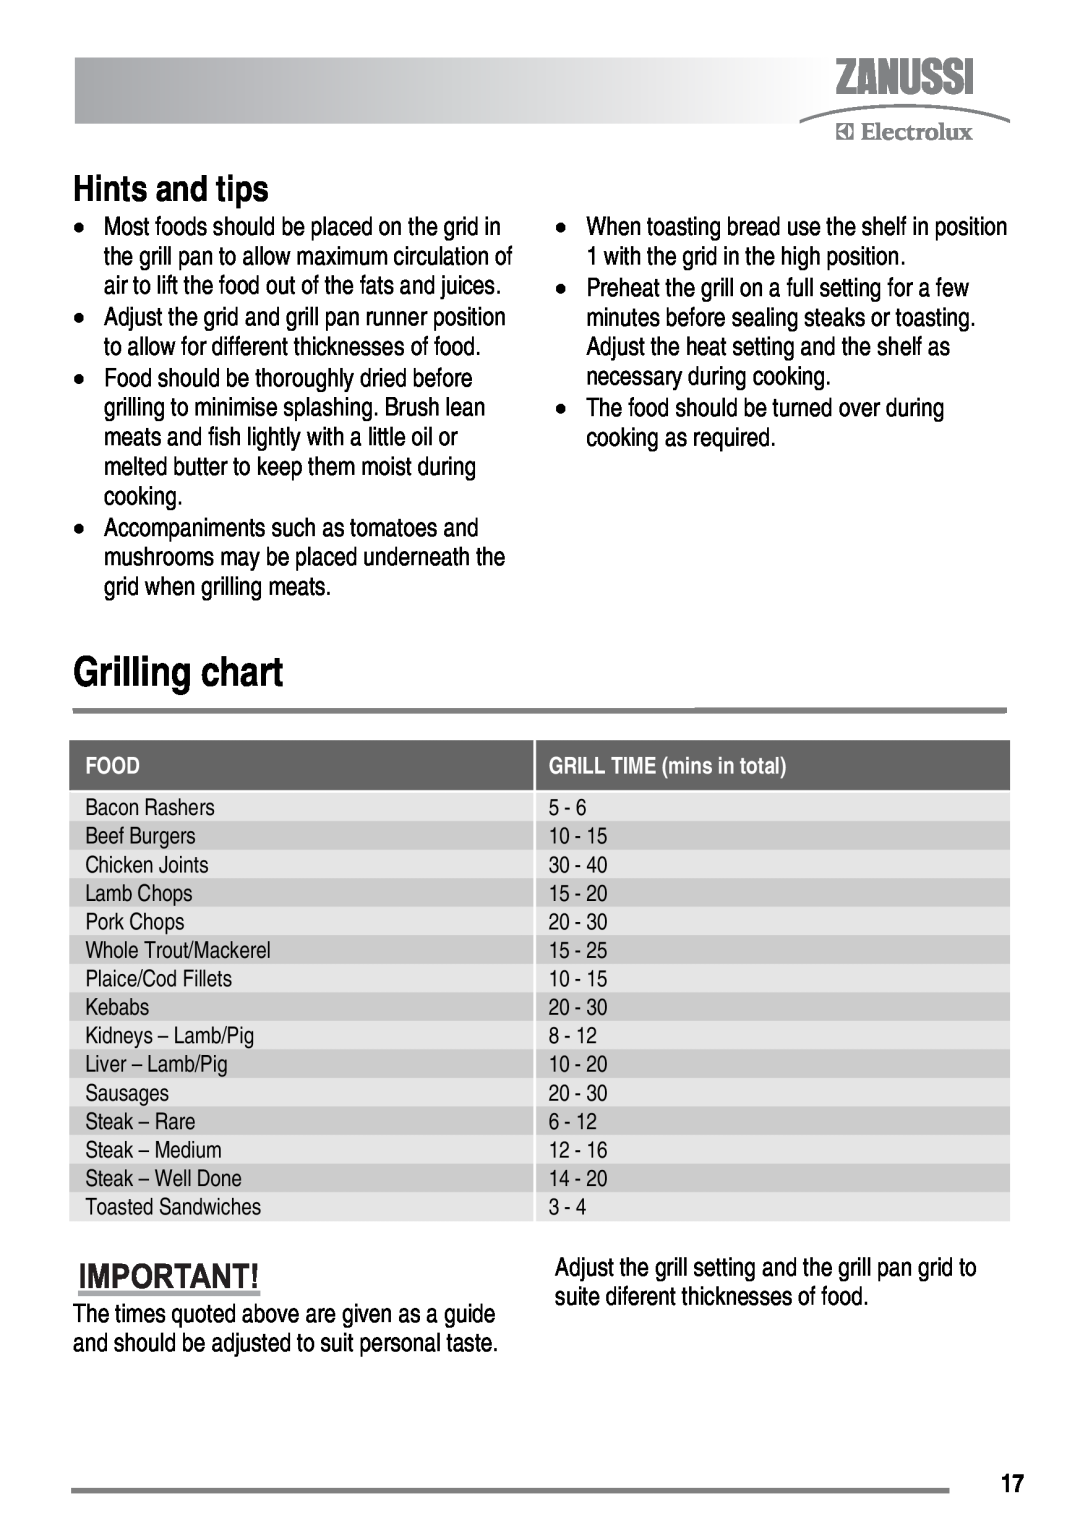 Zanussi ZKG6040 Grilling chart, The food should be turned over during cooking as required, Food, GRILL TIME mins in total 